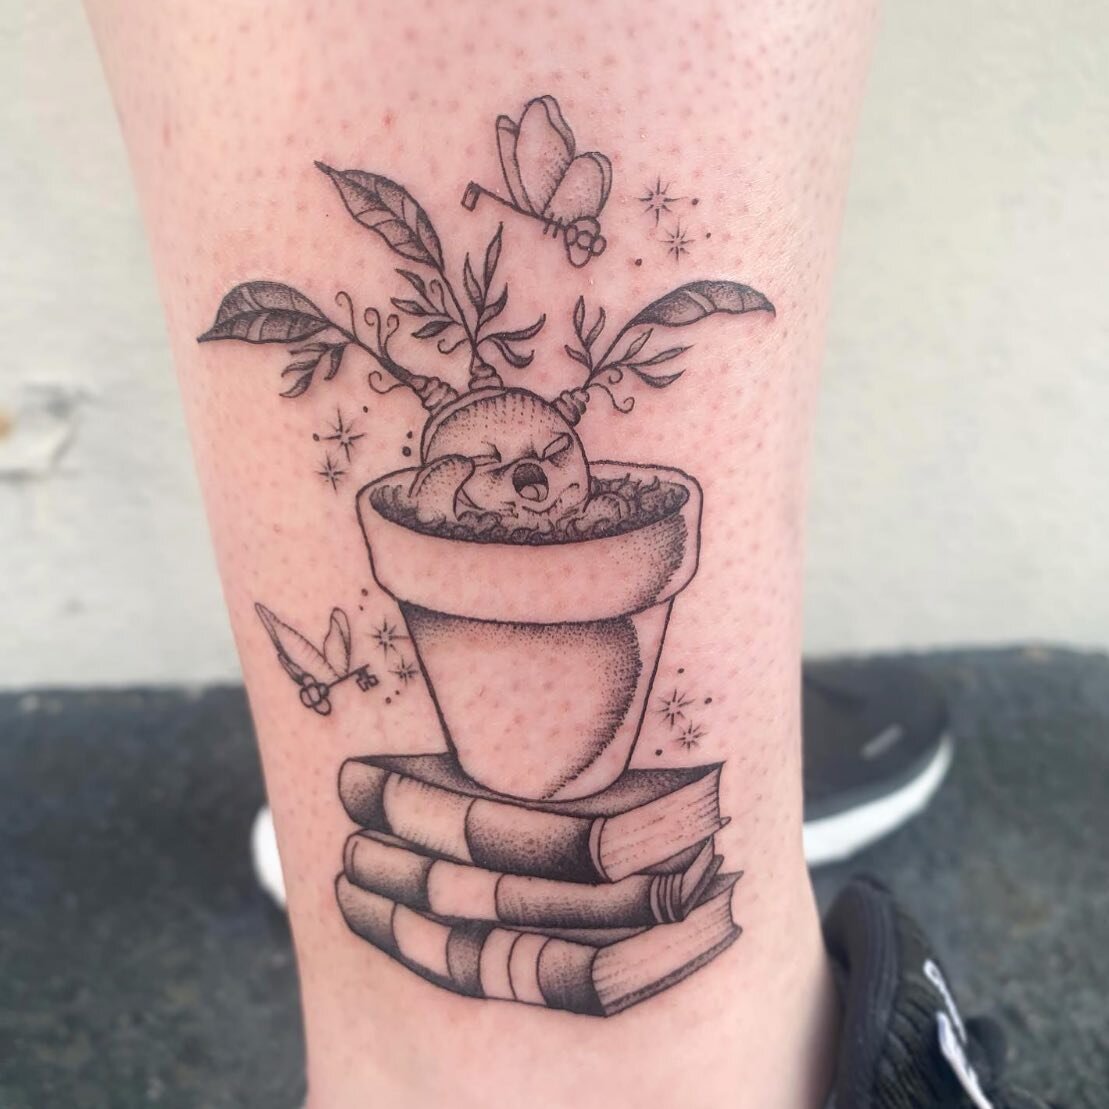 Baby Mandrake by @madisonpaigedavenport ✨ Tag someone who wants a Harry Potter Tattoo! #tattoo #njtattoo #njtattooartist #smallbusiness #mandrake #mandraketattoo #harrypotter #harrypottertattoo #handsomdevil #handsomedeviltattoo #handsomedeviltattooc